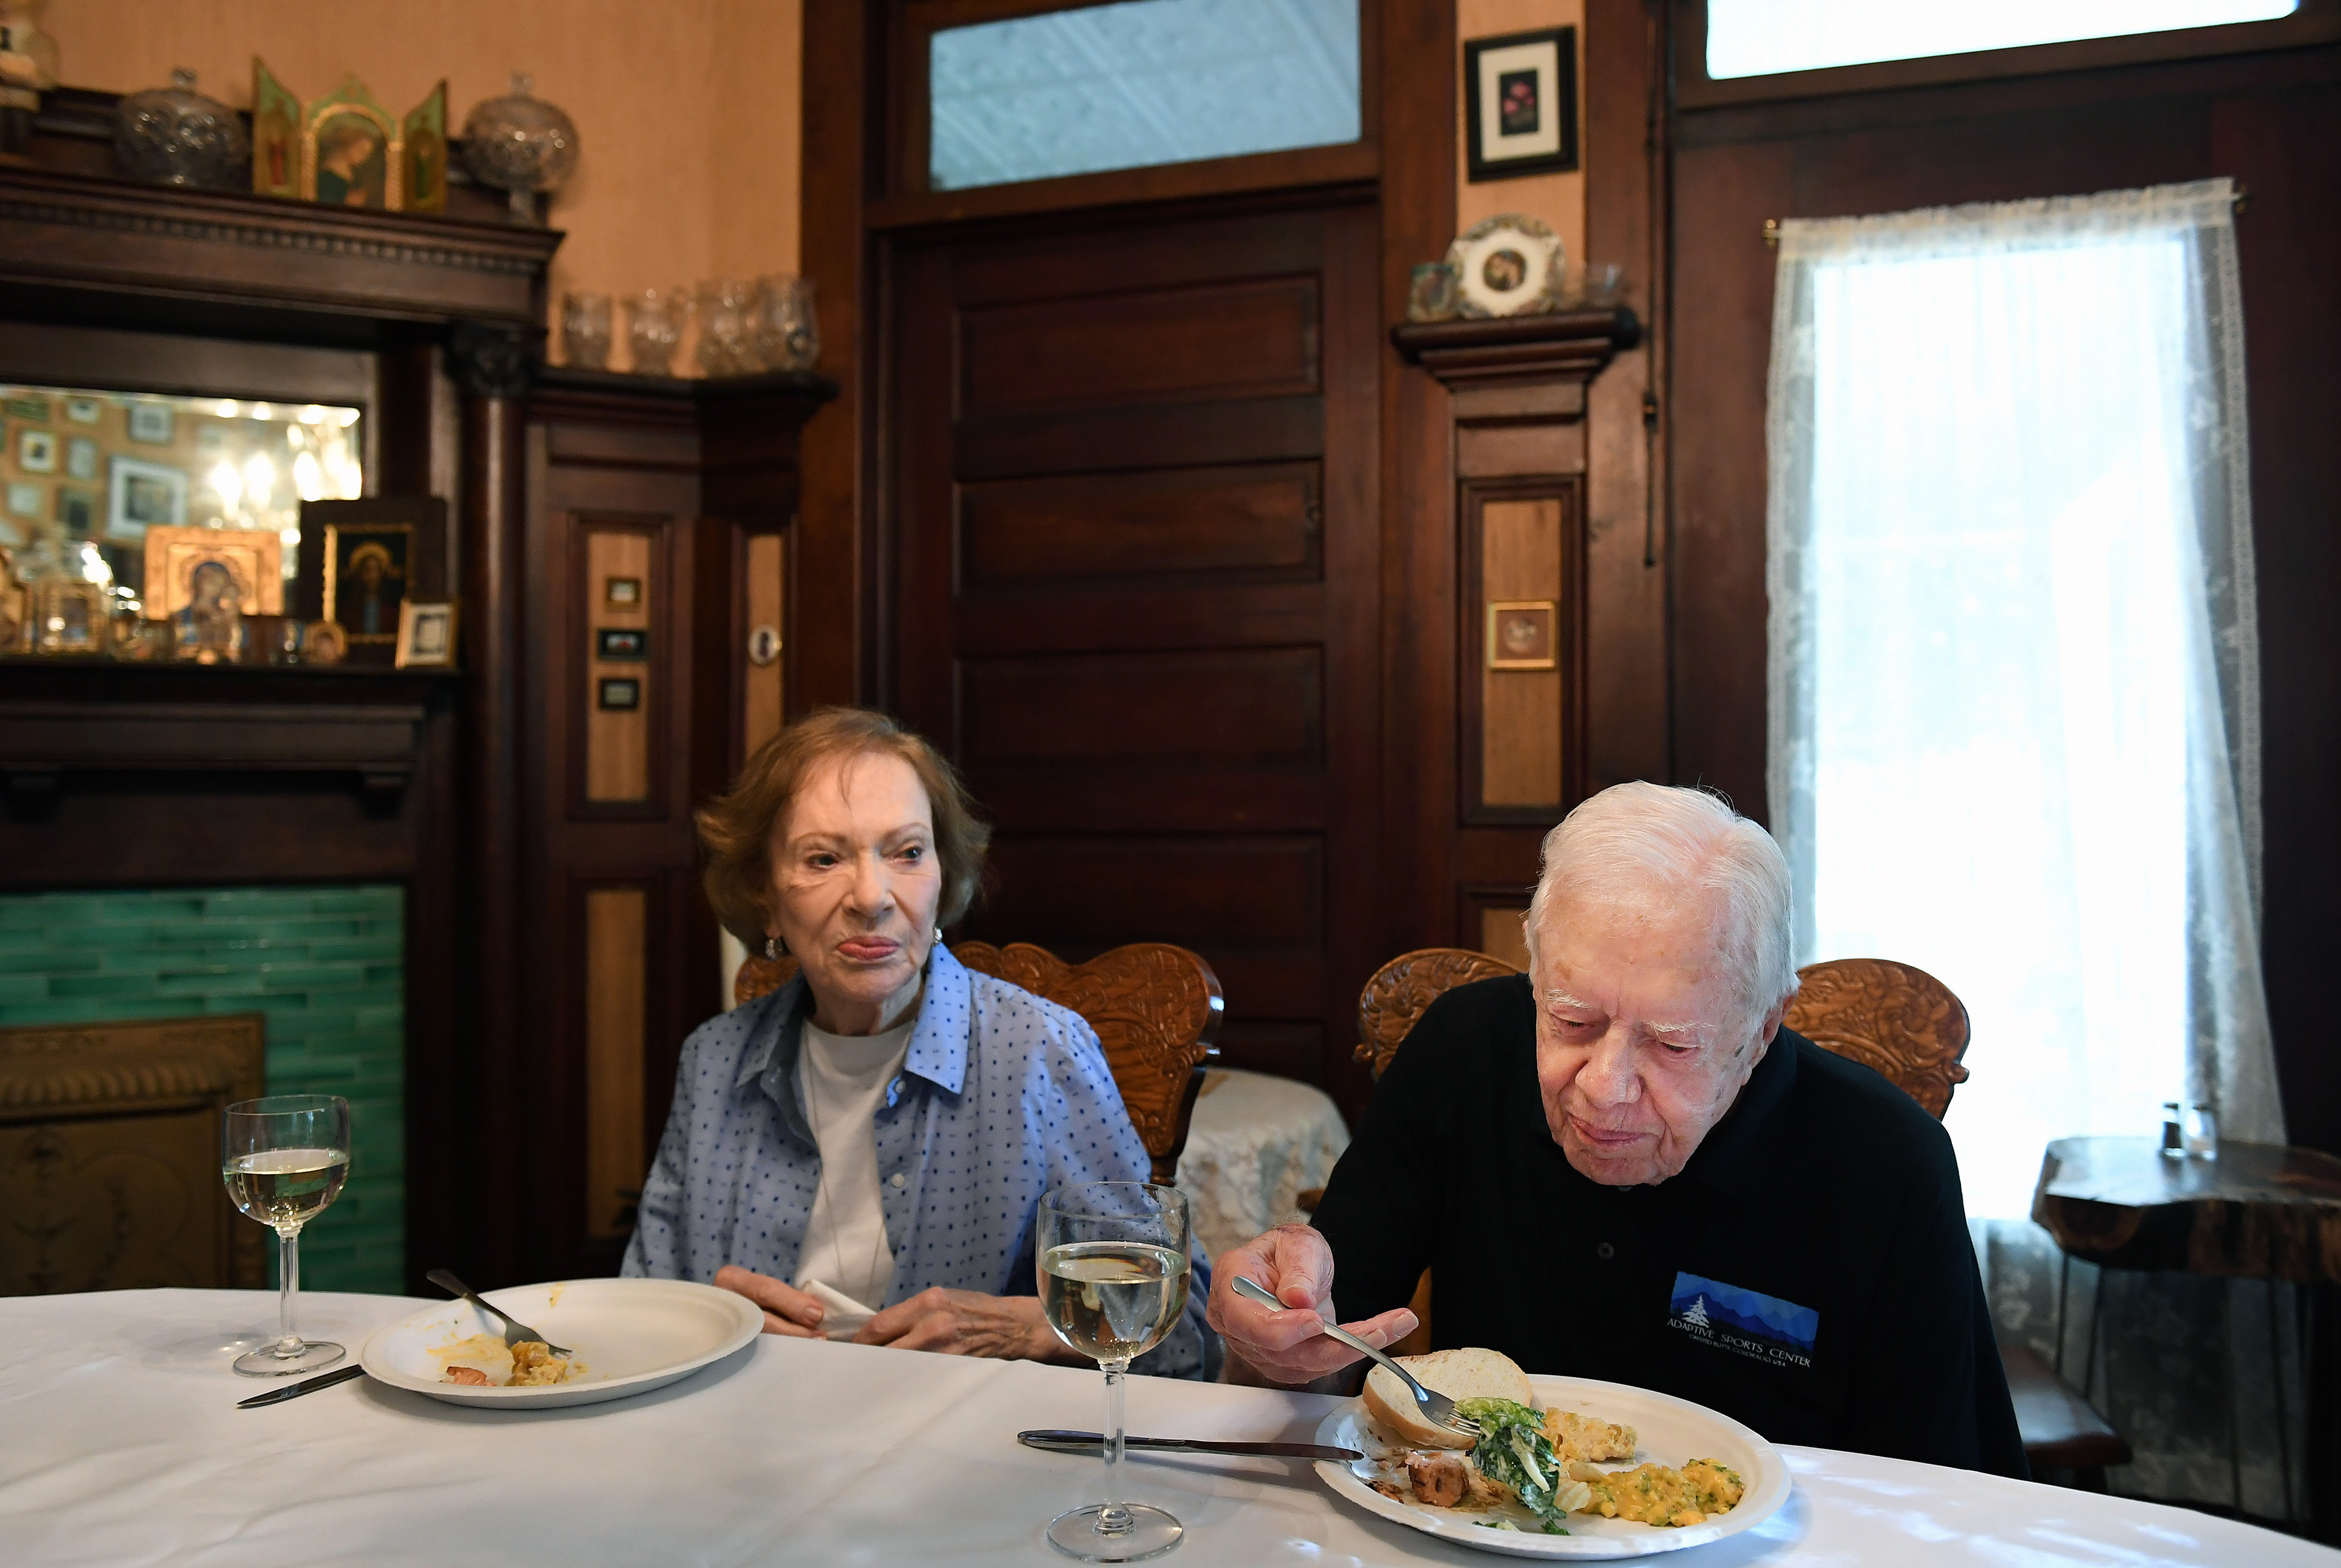 Jimmy and Rosalynn Carter having dinner at the home of friend, Jill Stuckey in Plains, Georgia, on August 4, 2018. | Source: Getty Images